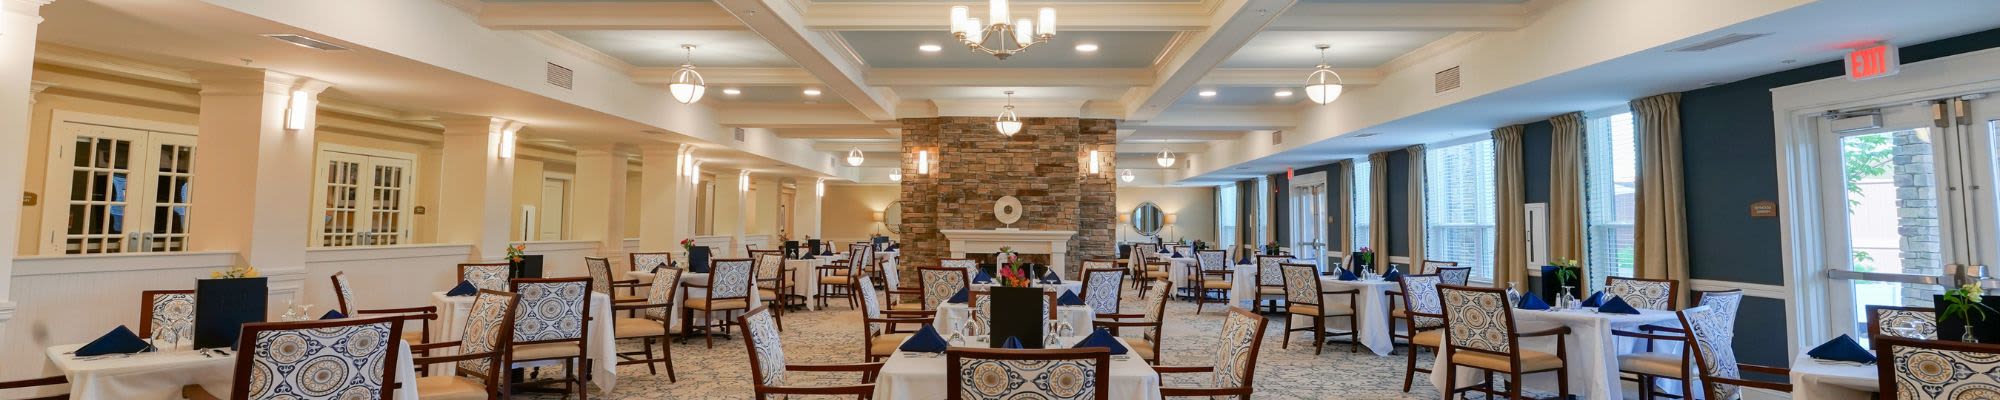 Dining at Harmony at Independence in Virginia Beach, Virginia